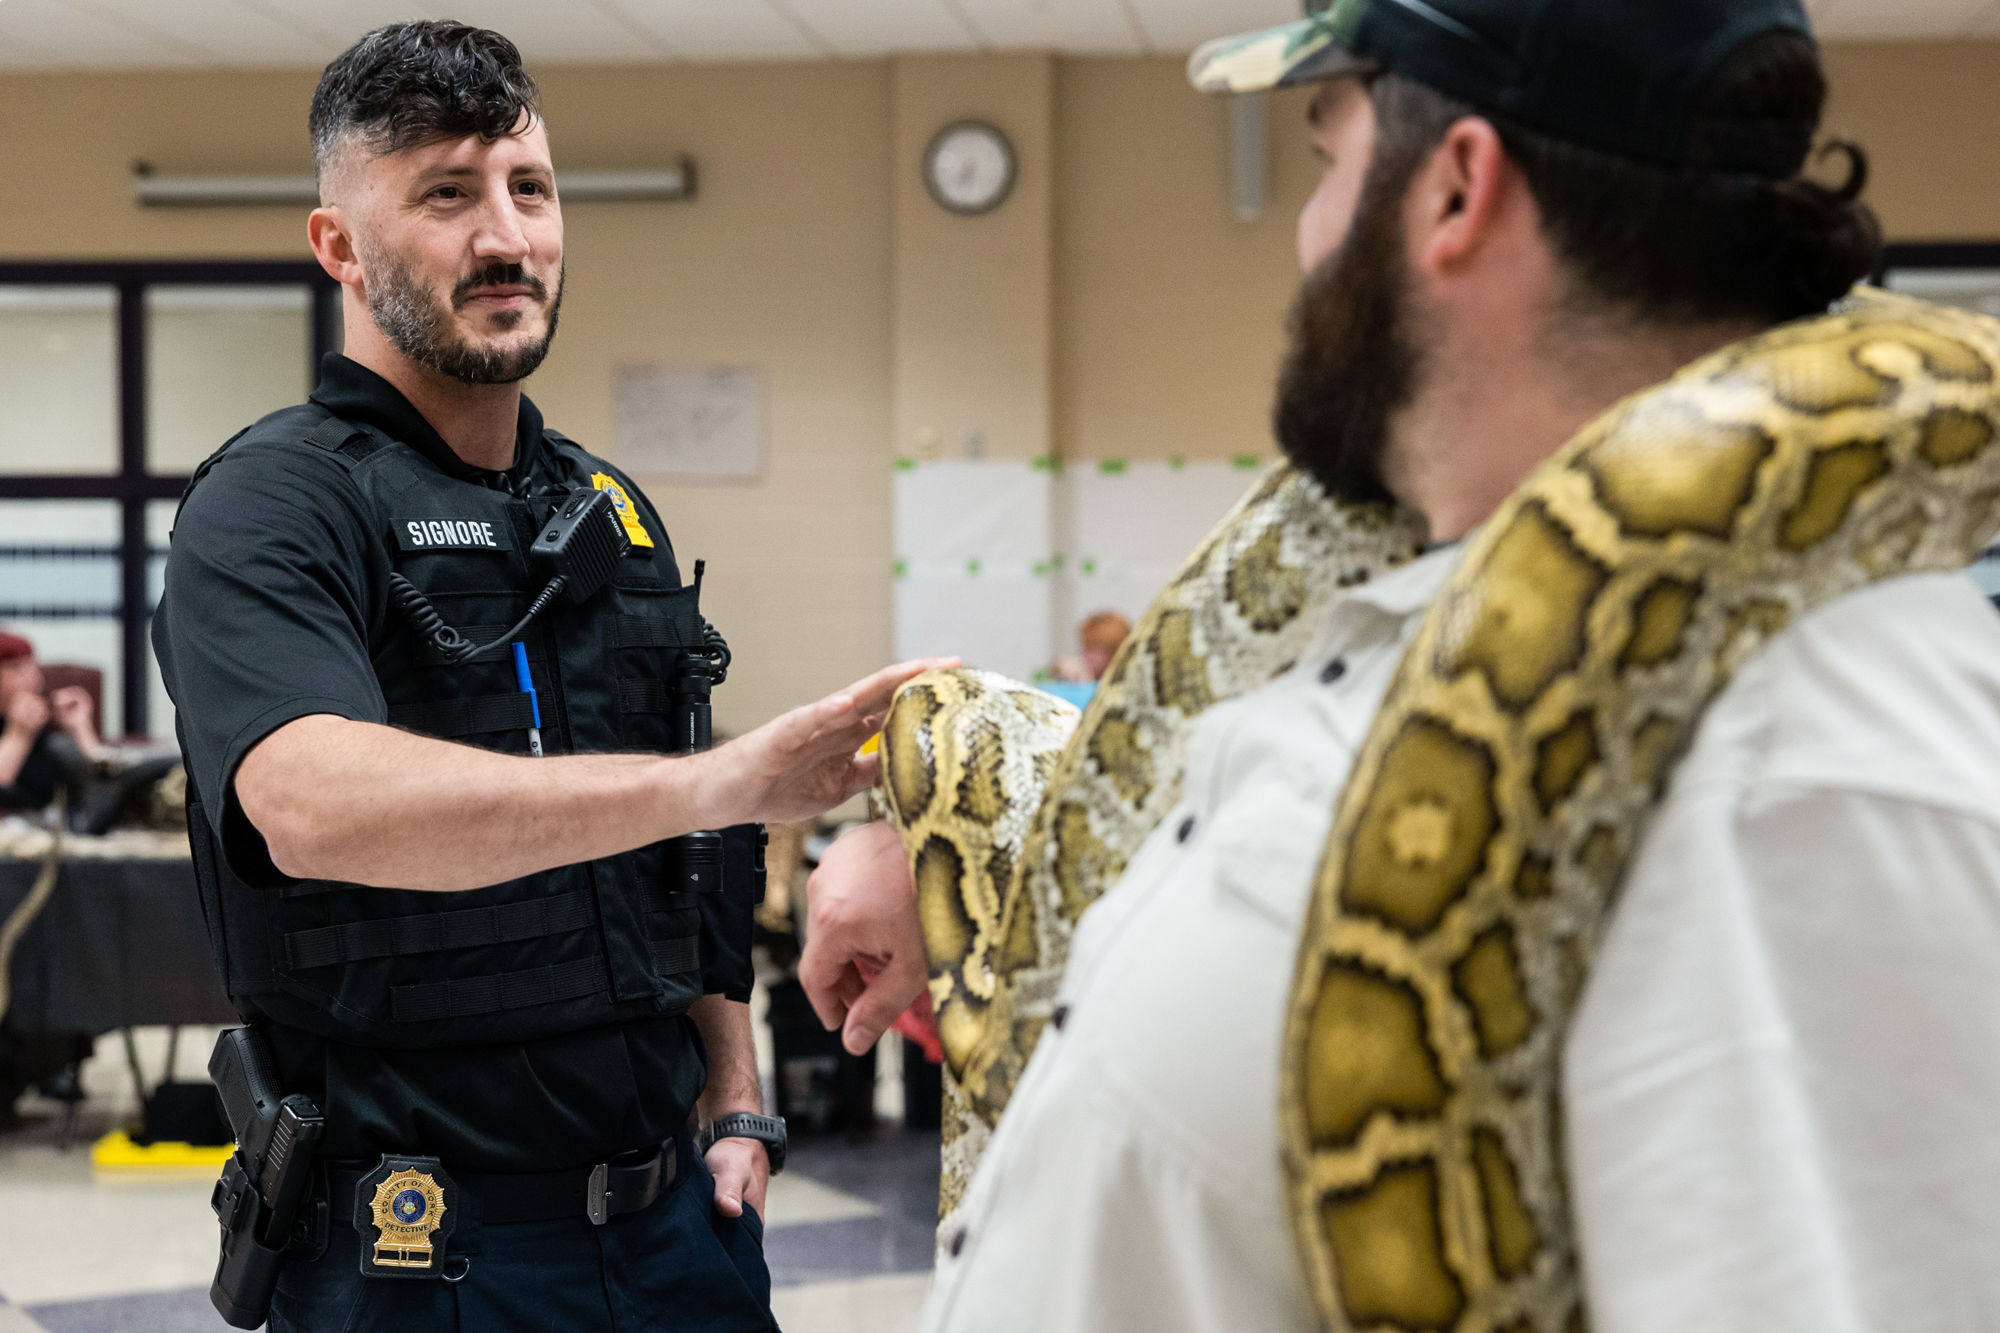 A detective in uniform admires a large snake on the shoulders of a man in the foreground.